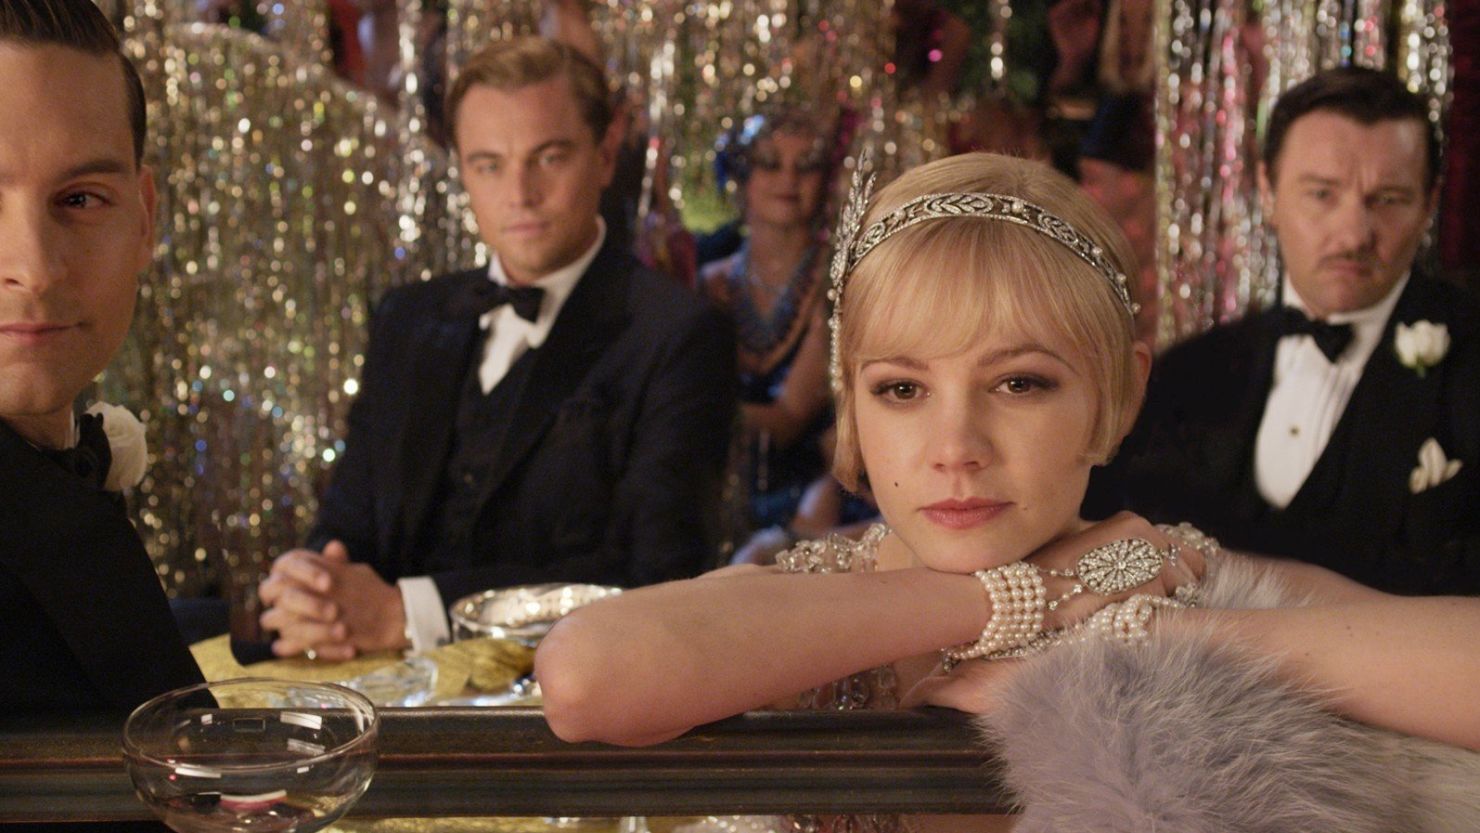 "The Great Gatsby" had a $51.1 million debut, but still came in second place to "Iron Man 3."